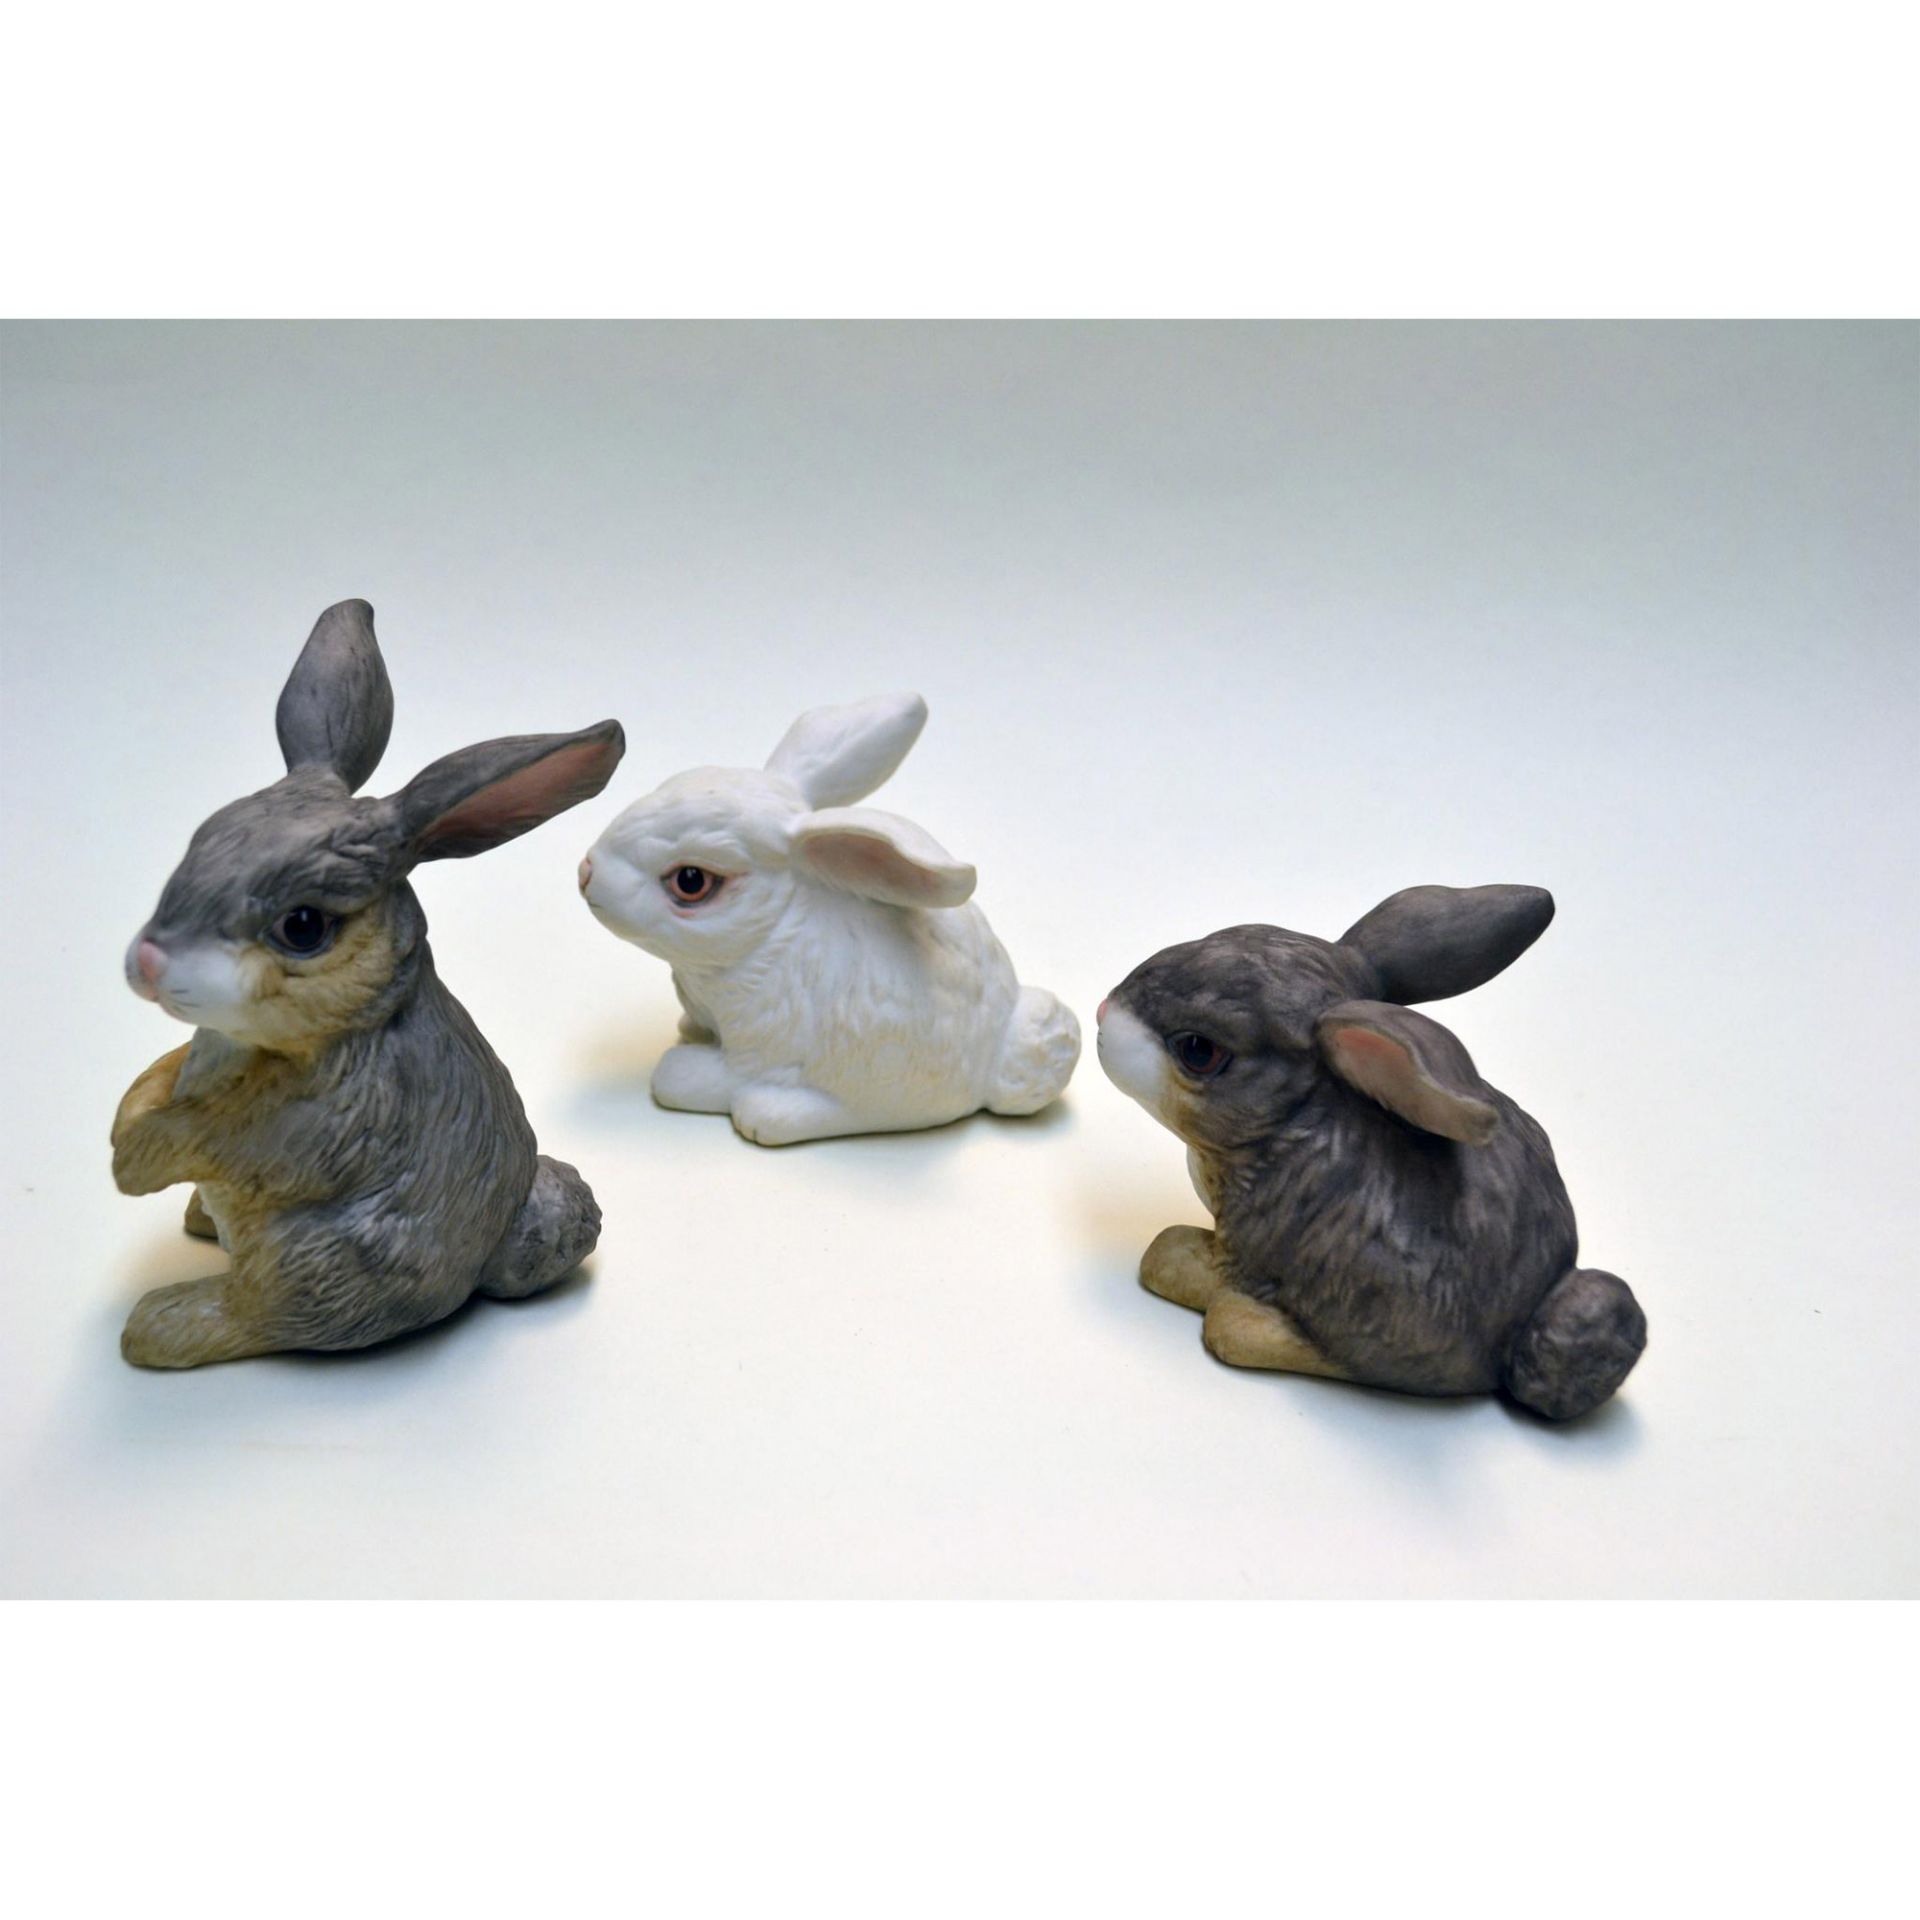 Boehm Porcelain Rabbits, Sitting And At Rest, White & Wild Figurines, 3 Pcs - Image 2 of 6